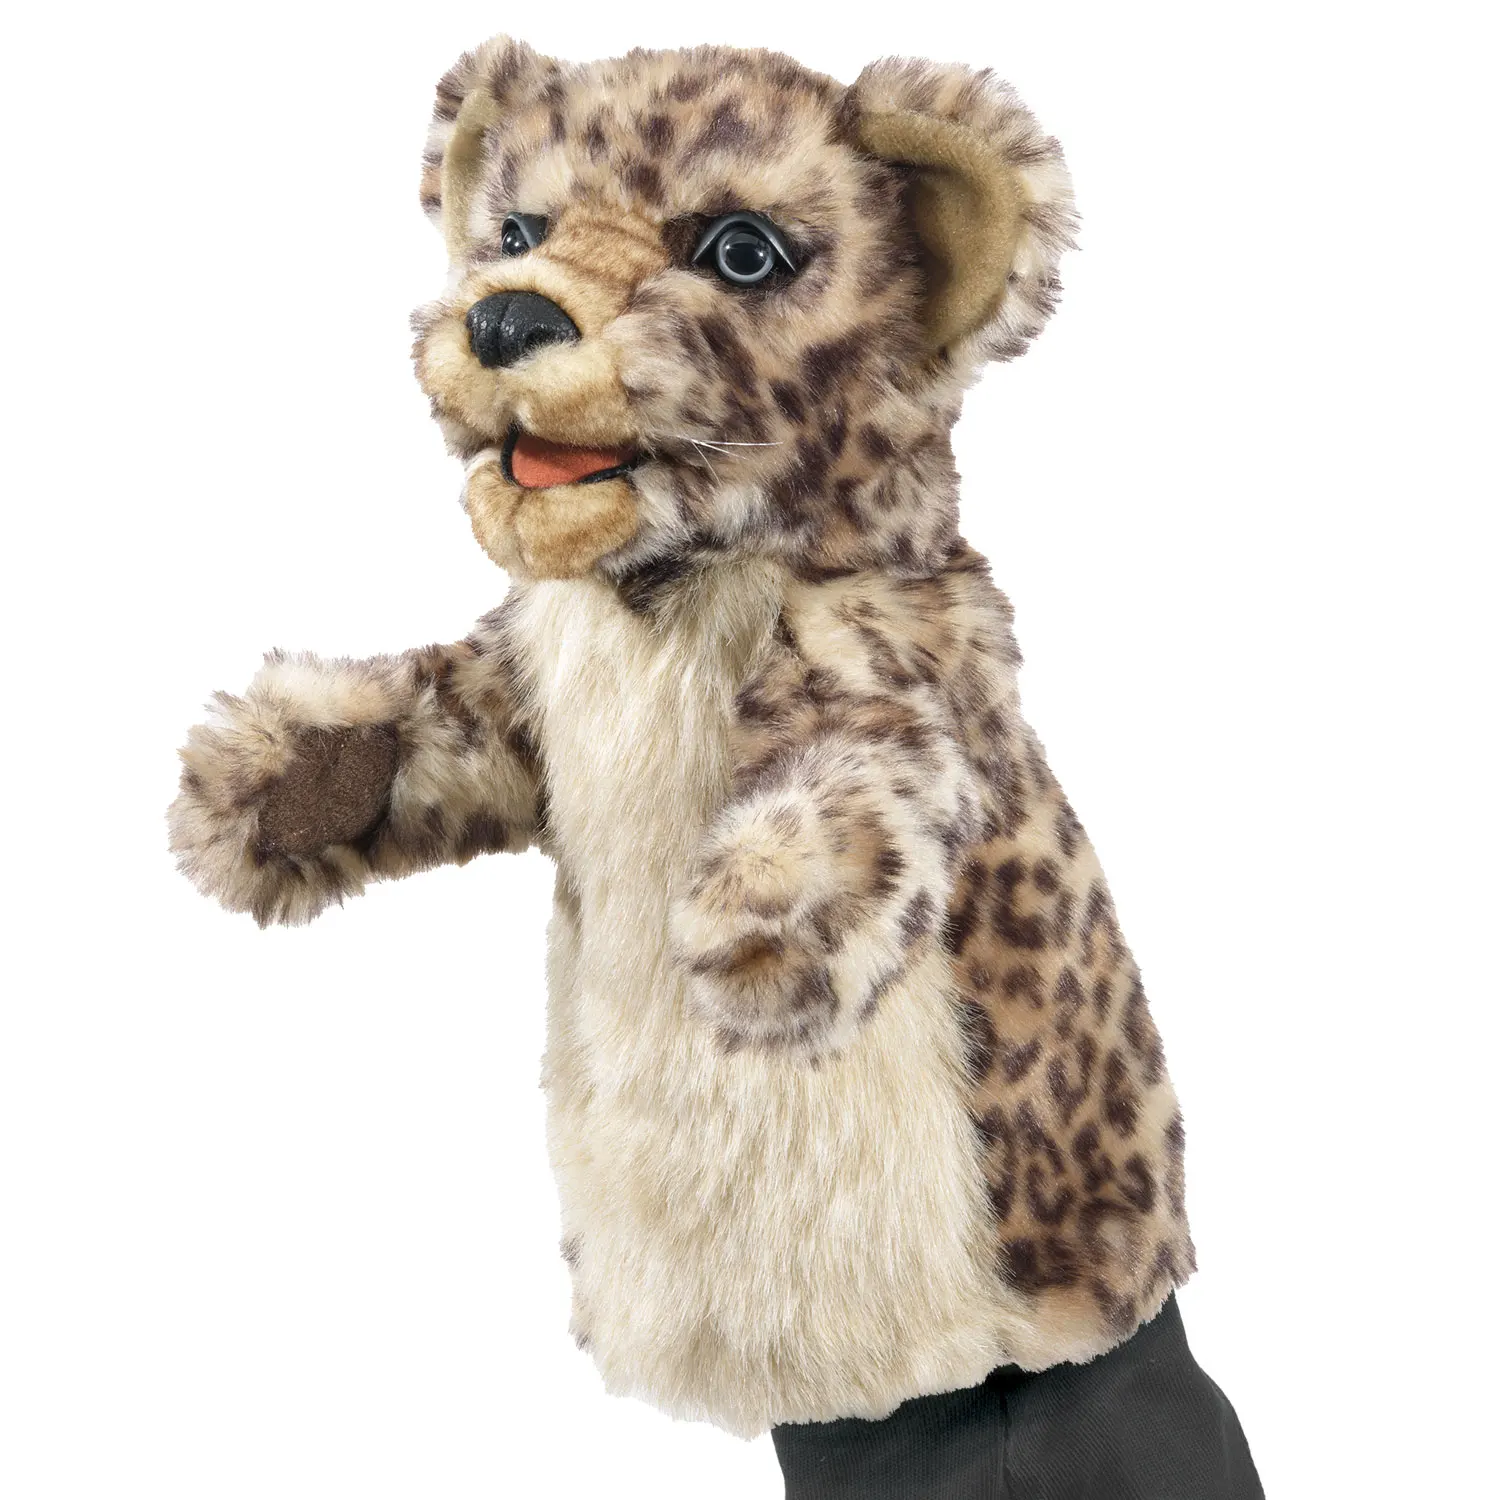 Leopard Cub Stage Puppet